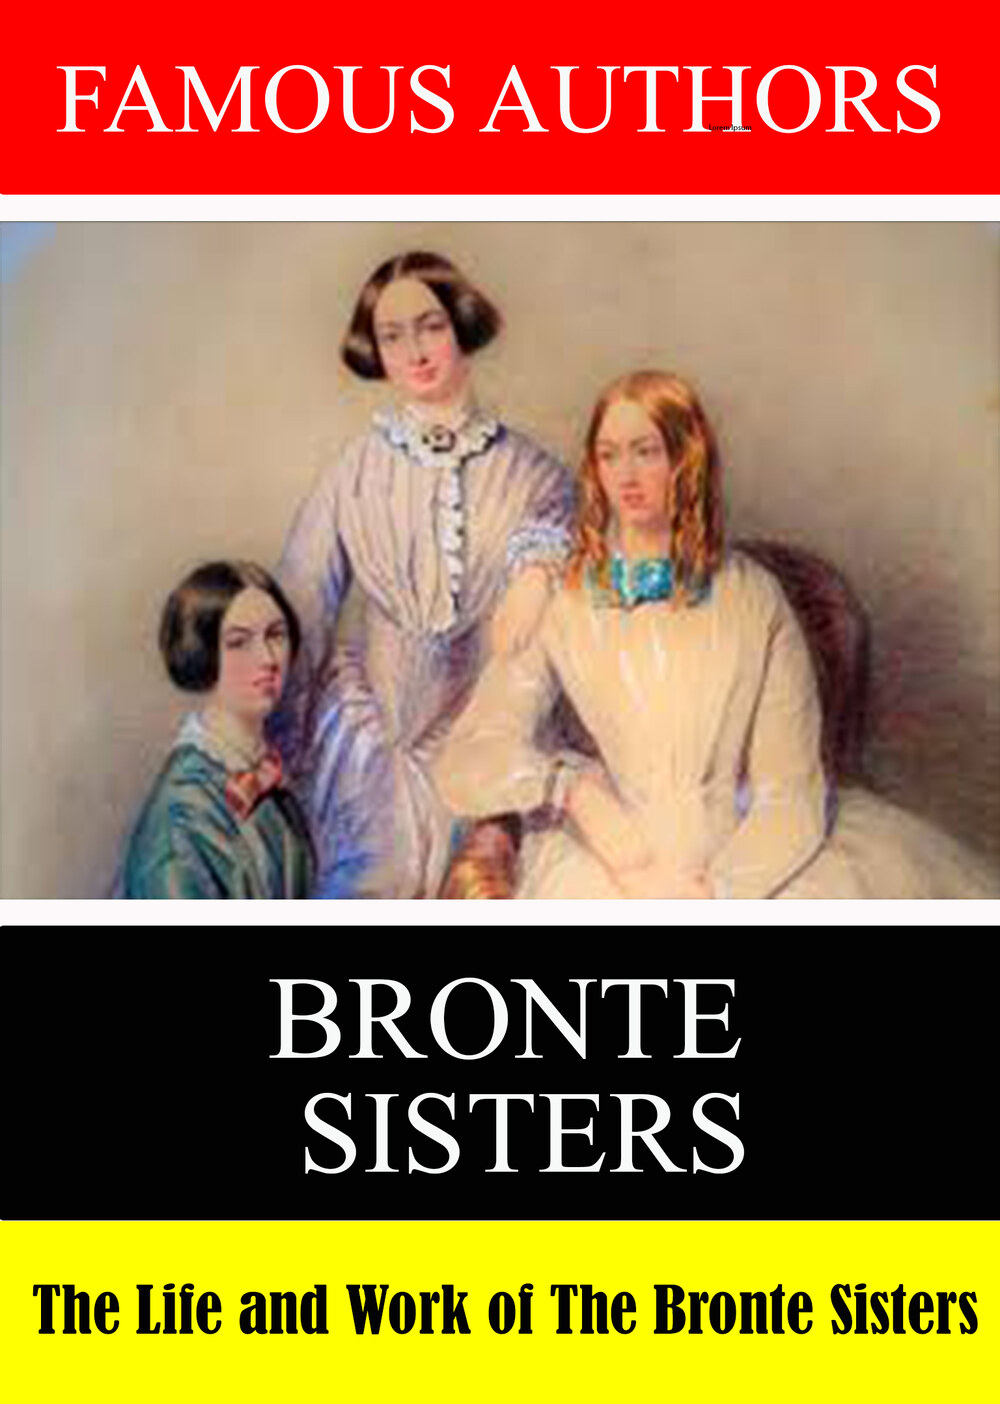 L7873 - Famous Authors: The Life and Work The Bronte Sisters